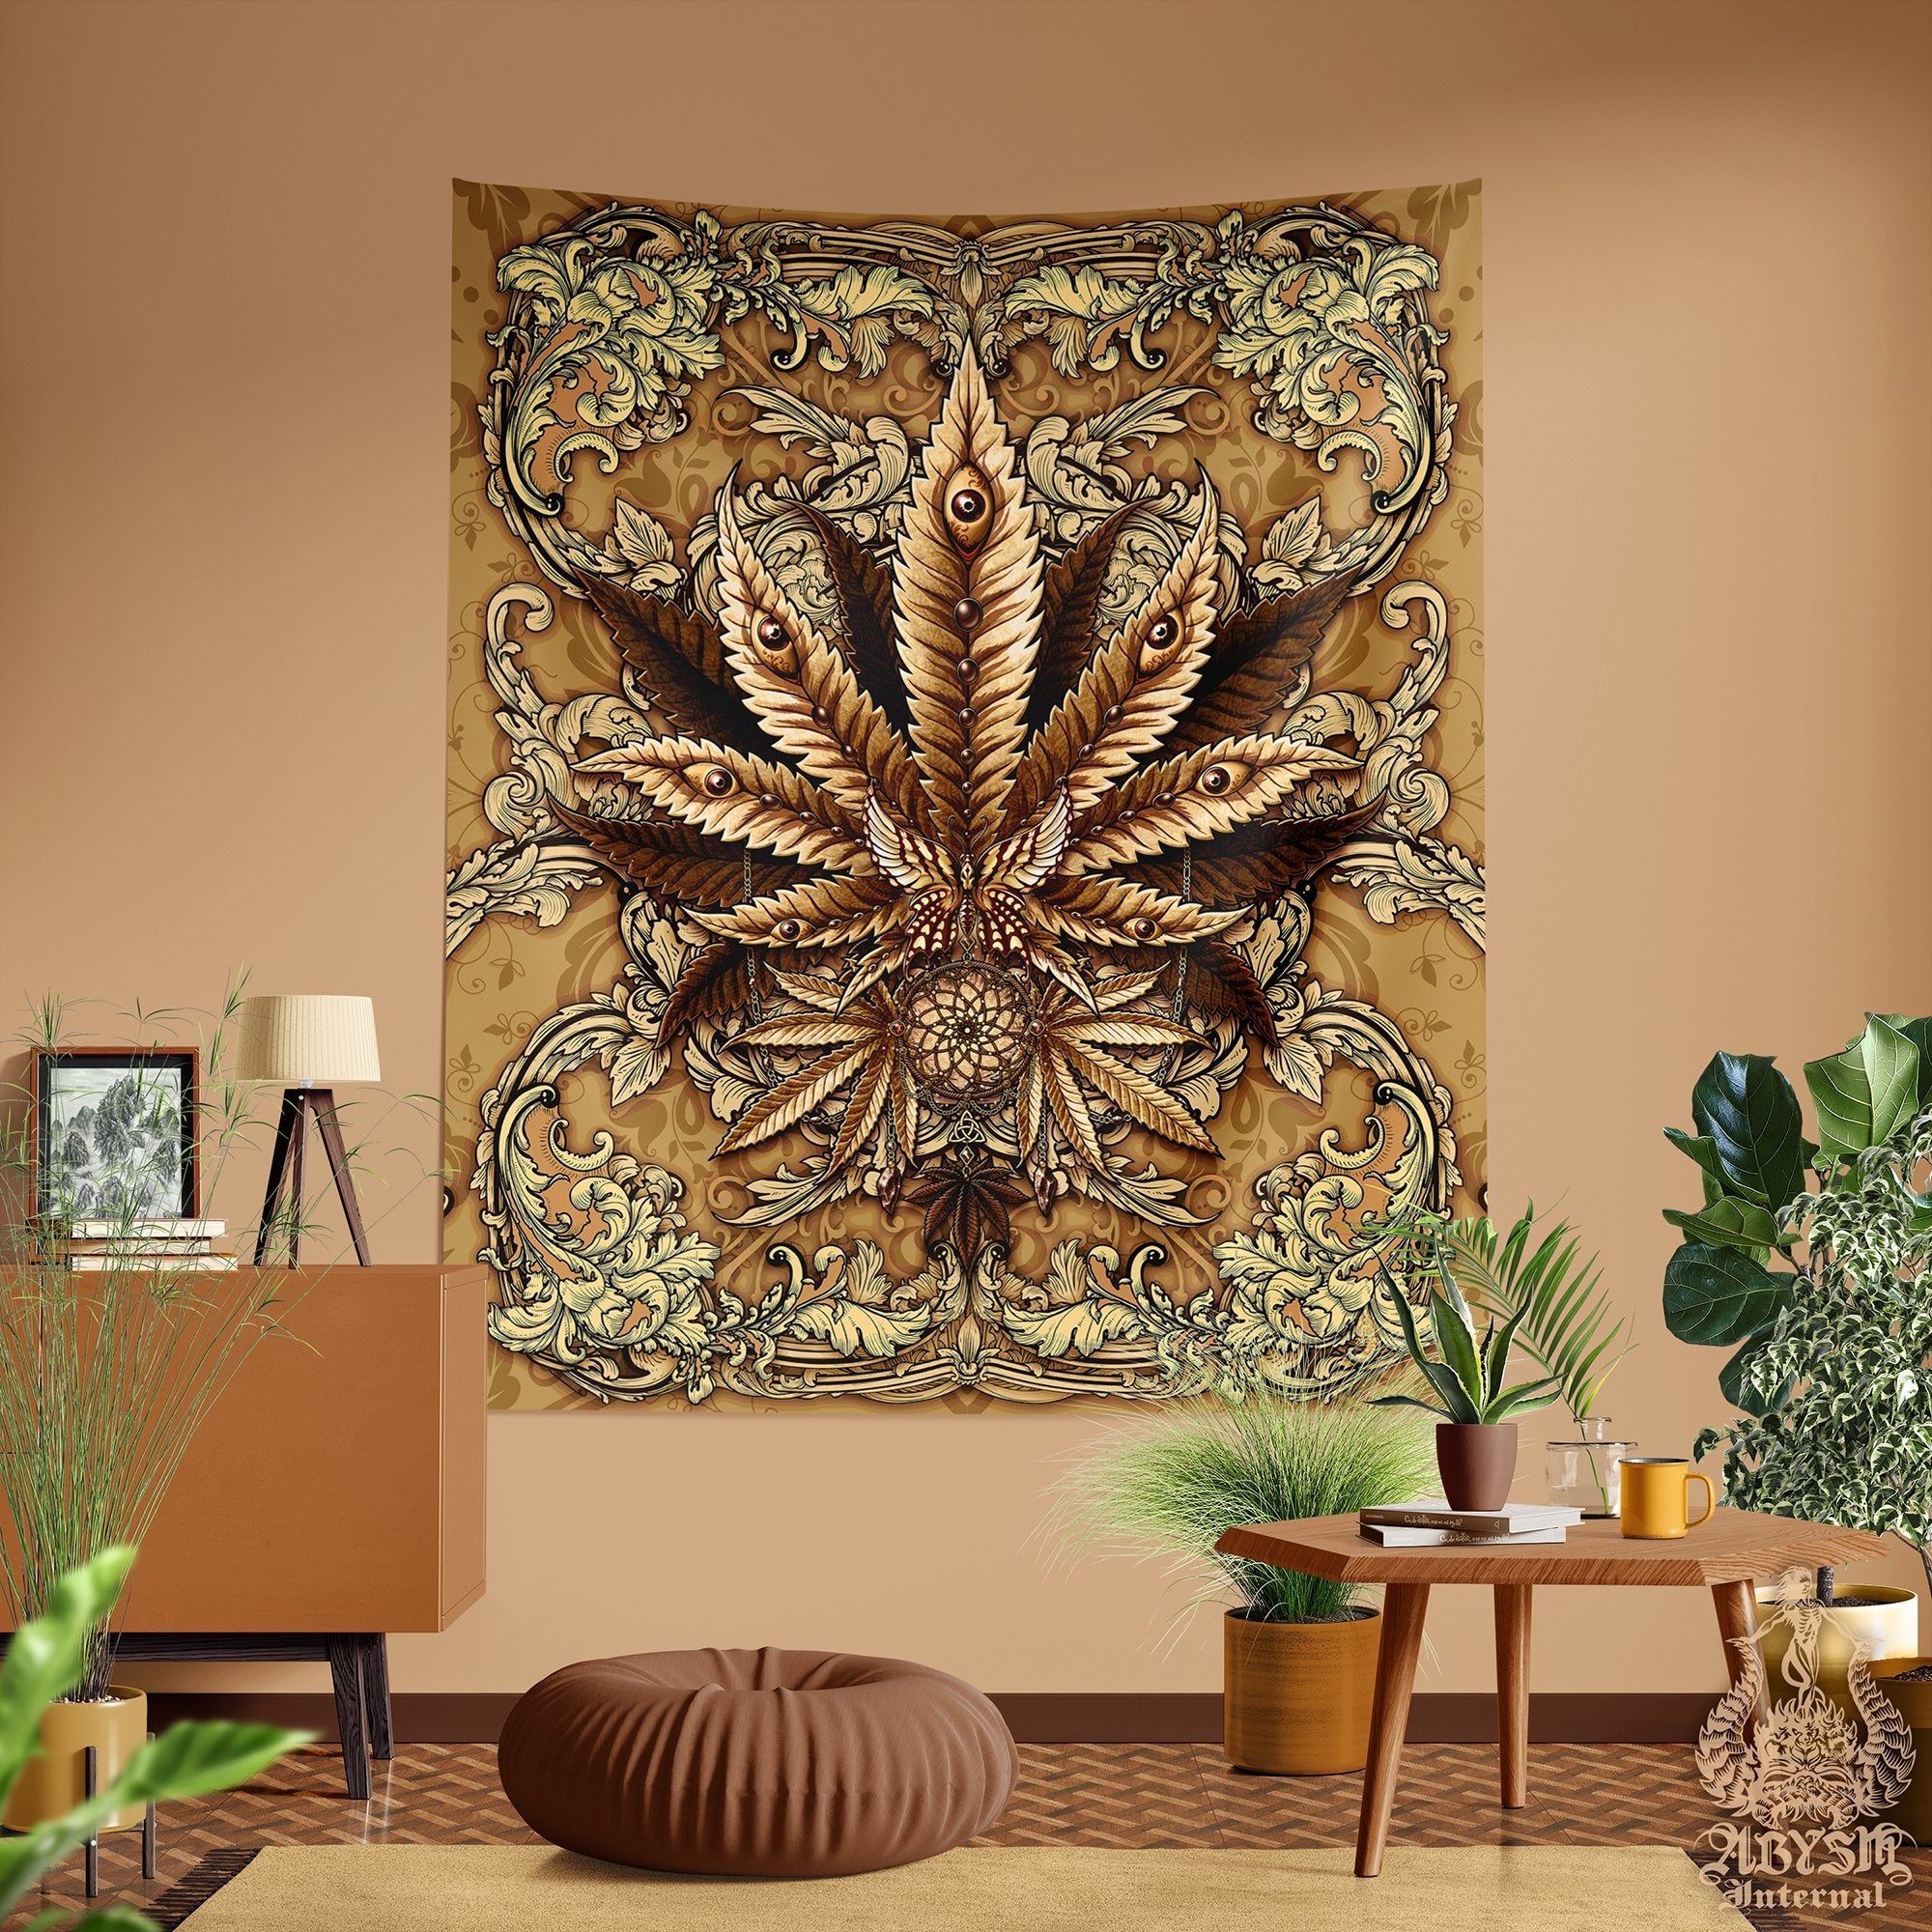 Weed Tapestry, Cannabis Shop Decor, Marijuana Wall Hanging, Hippie Home Decor, Indie Art Print, 420 Gift, Eclectic and Funky - Cream - Abysm Internal